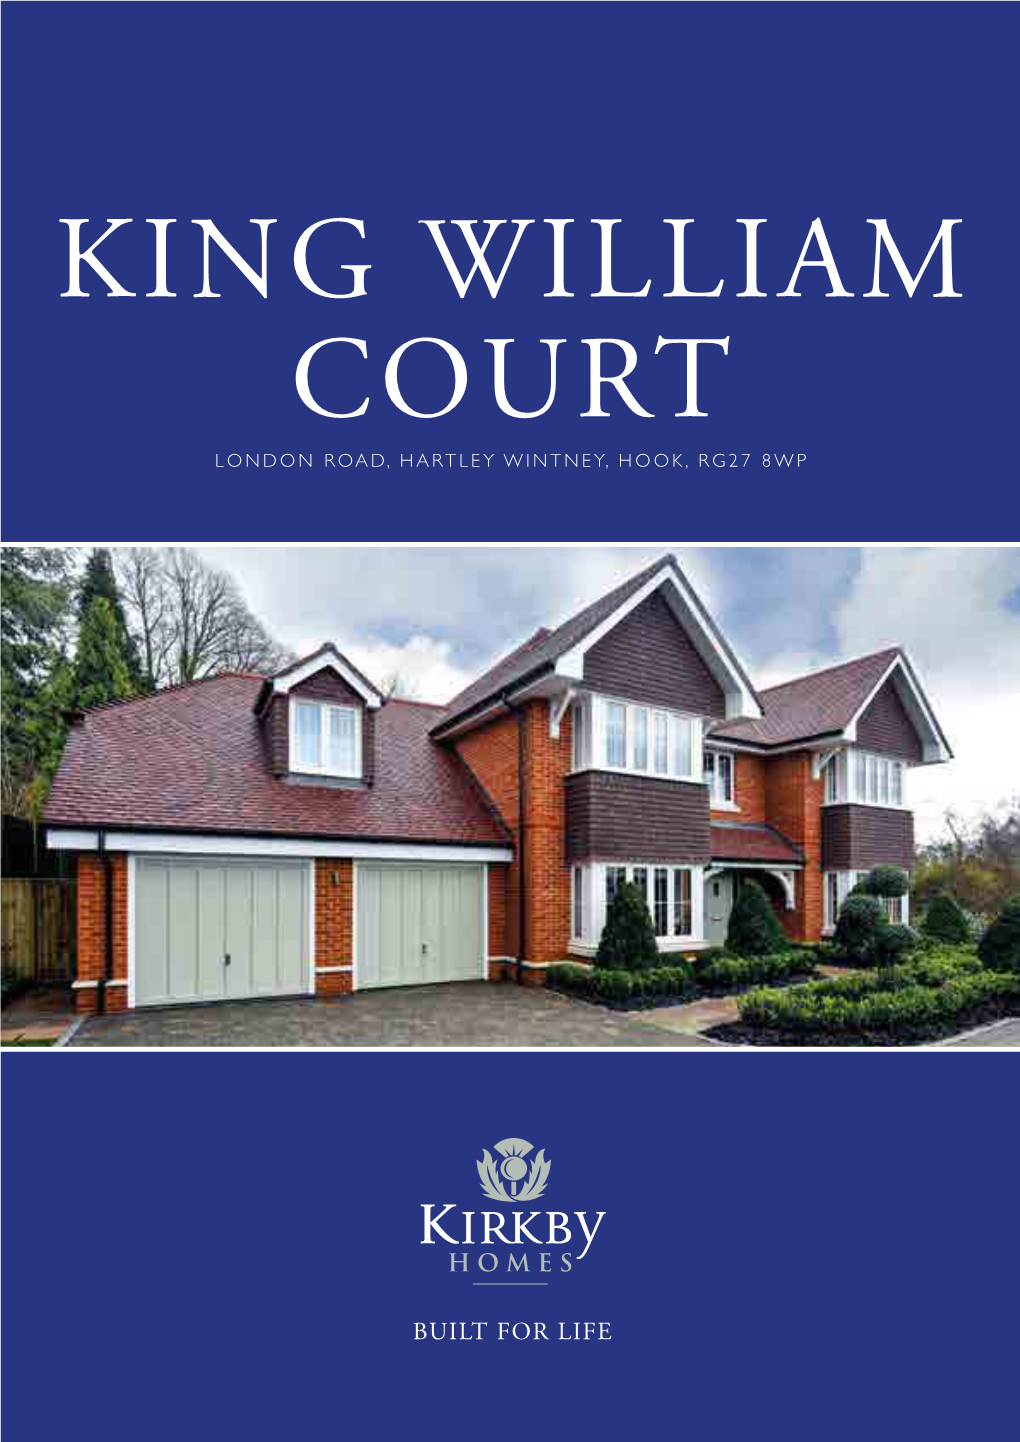 King William Court London Road, Hartley Wintney, Hook, Rg27 8Wp